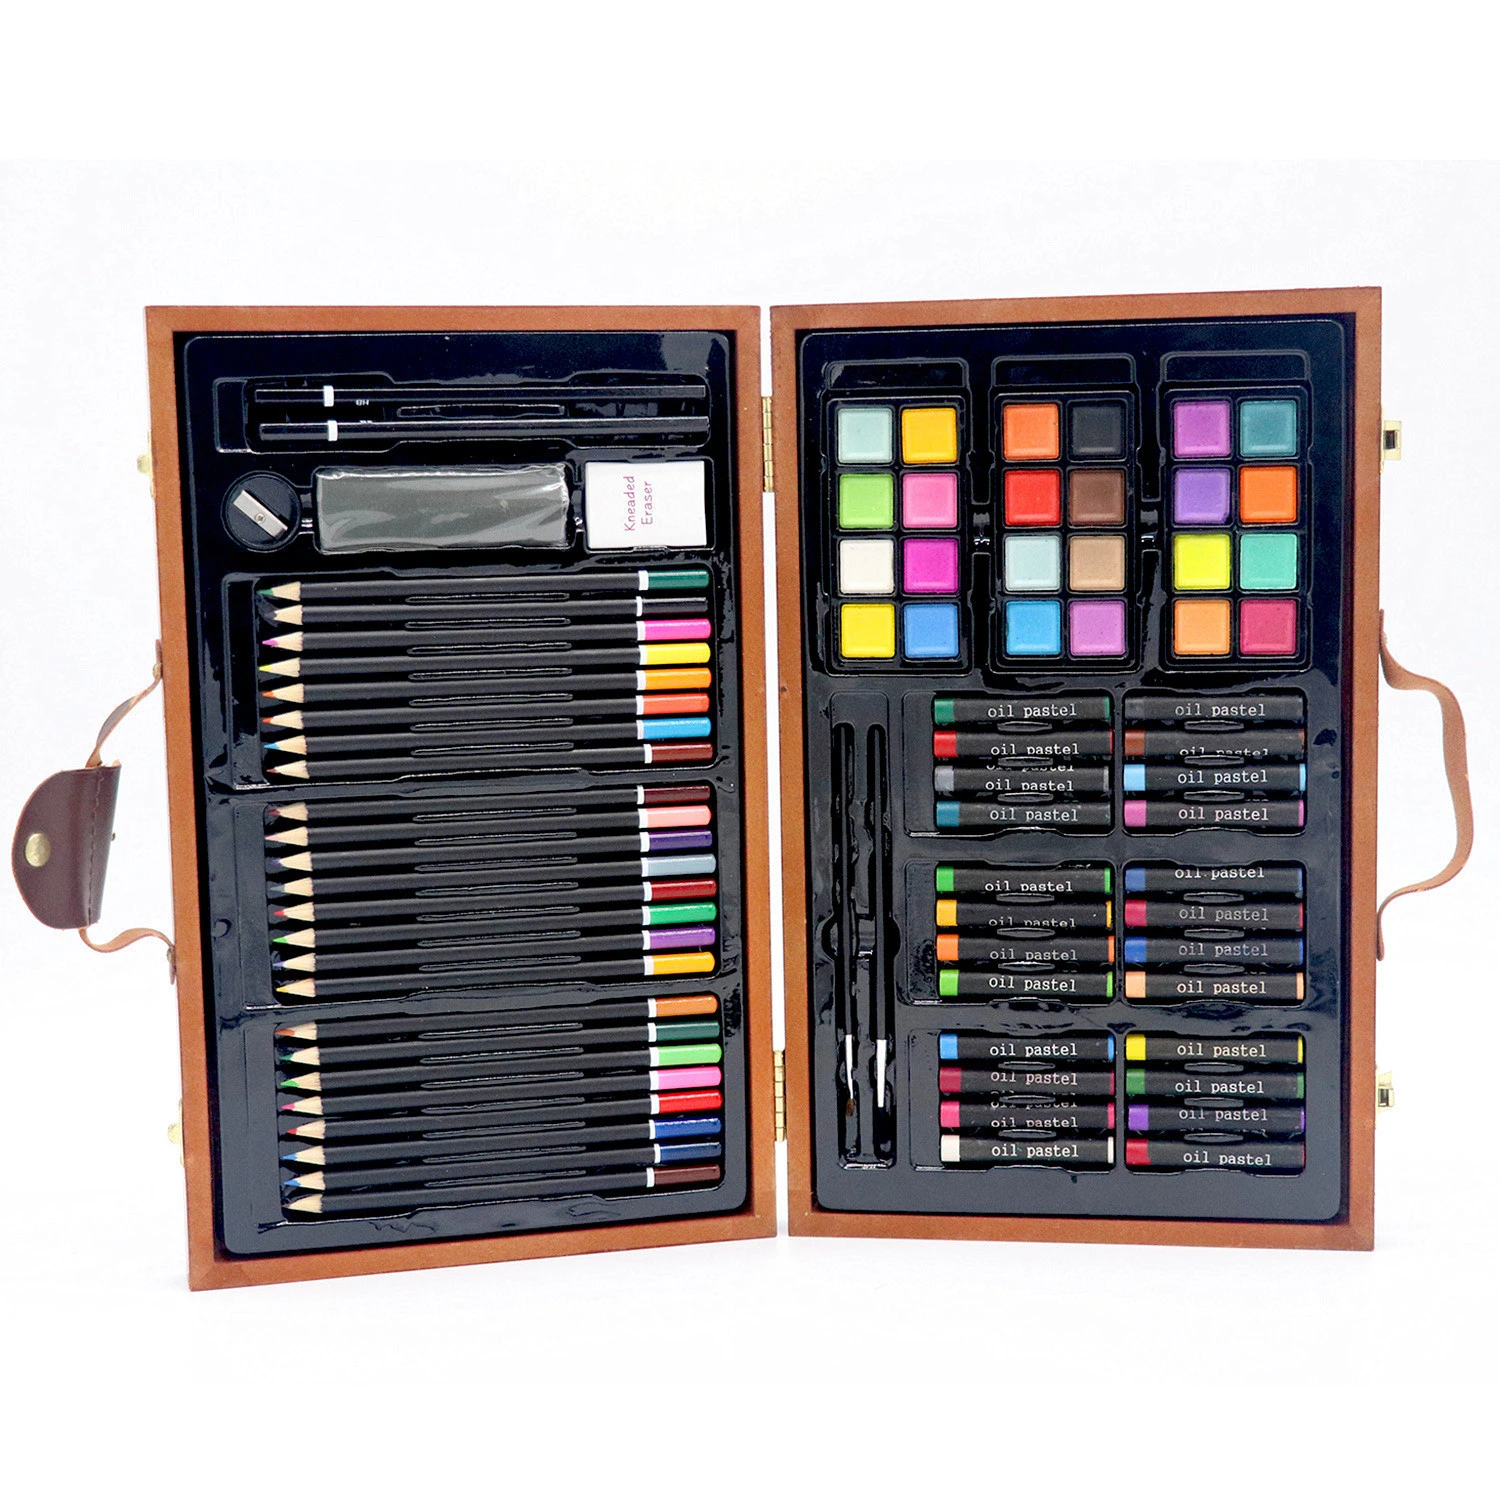 Kids Art Painting For School item Promotion  wooden case drawing stationery Set 79 pcs